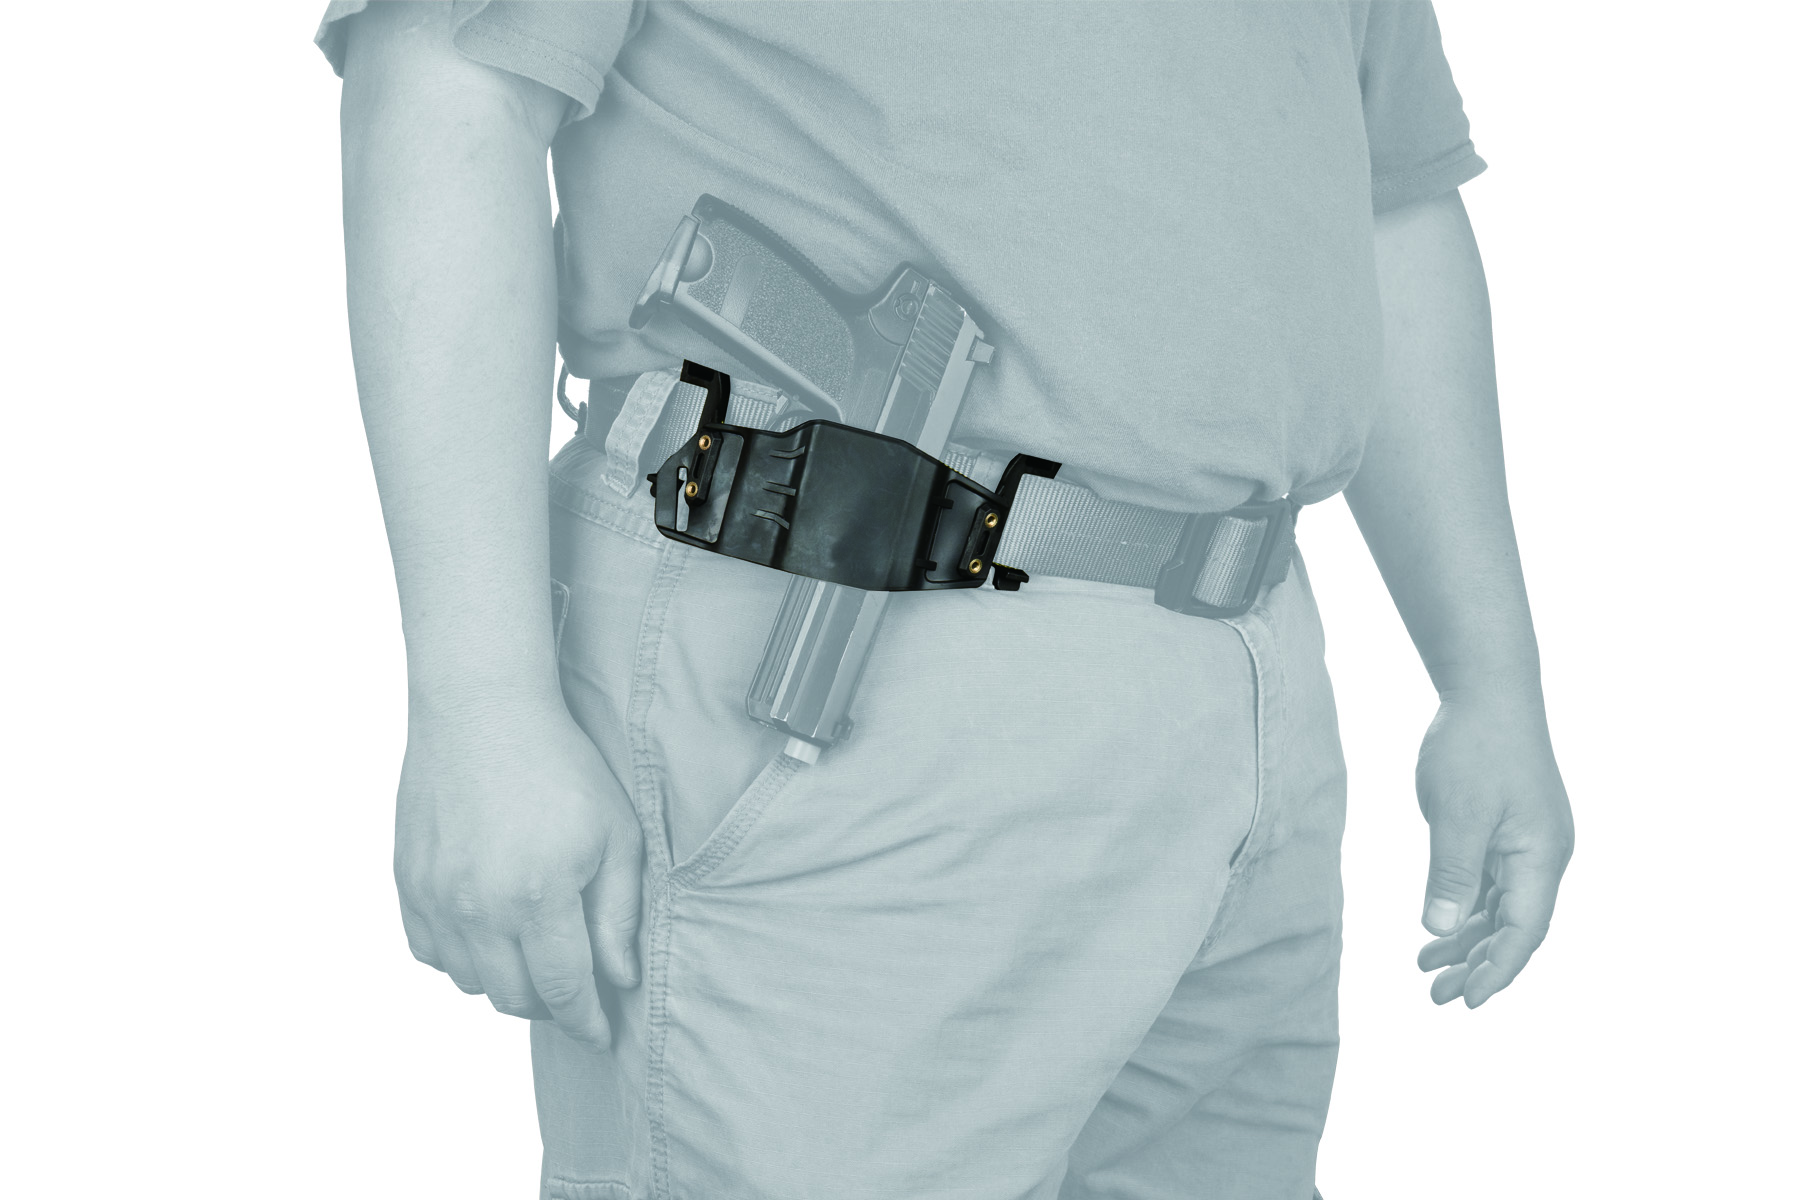 CA-1242B ABS POLYMER TACTICAL PISTOL WRAP BELT HOLSTER (BLACK) - Click Image to Close